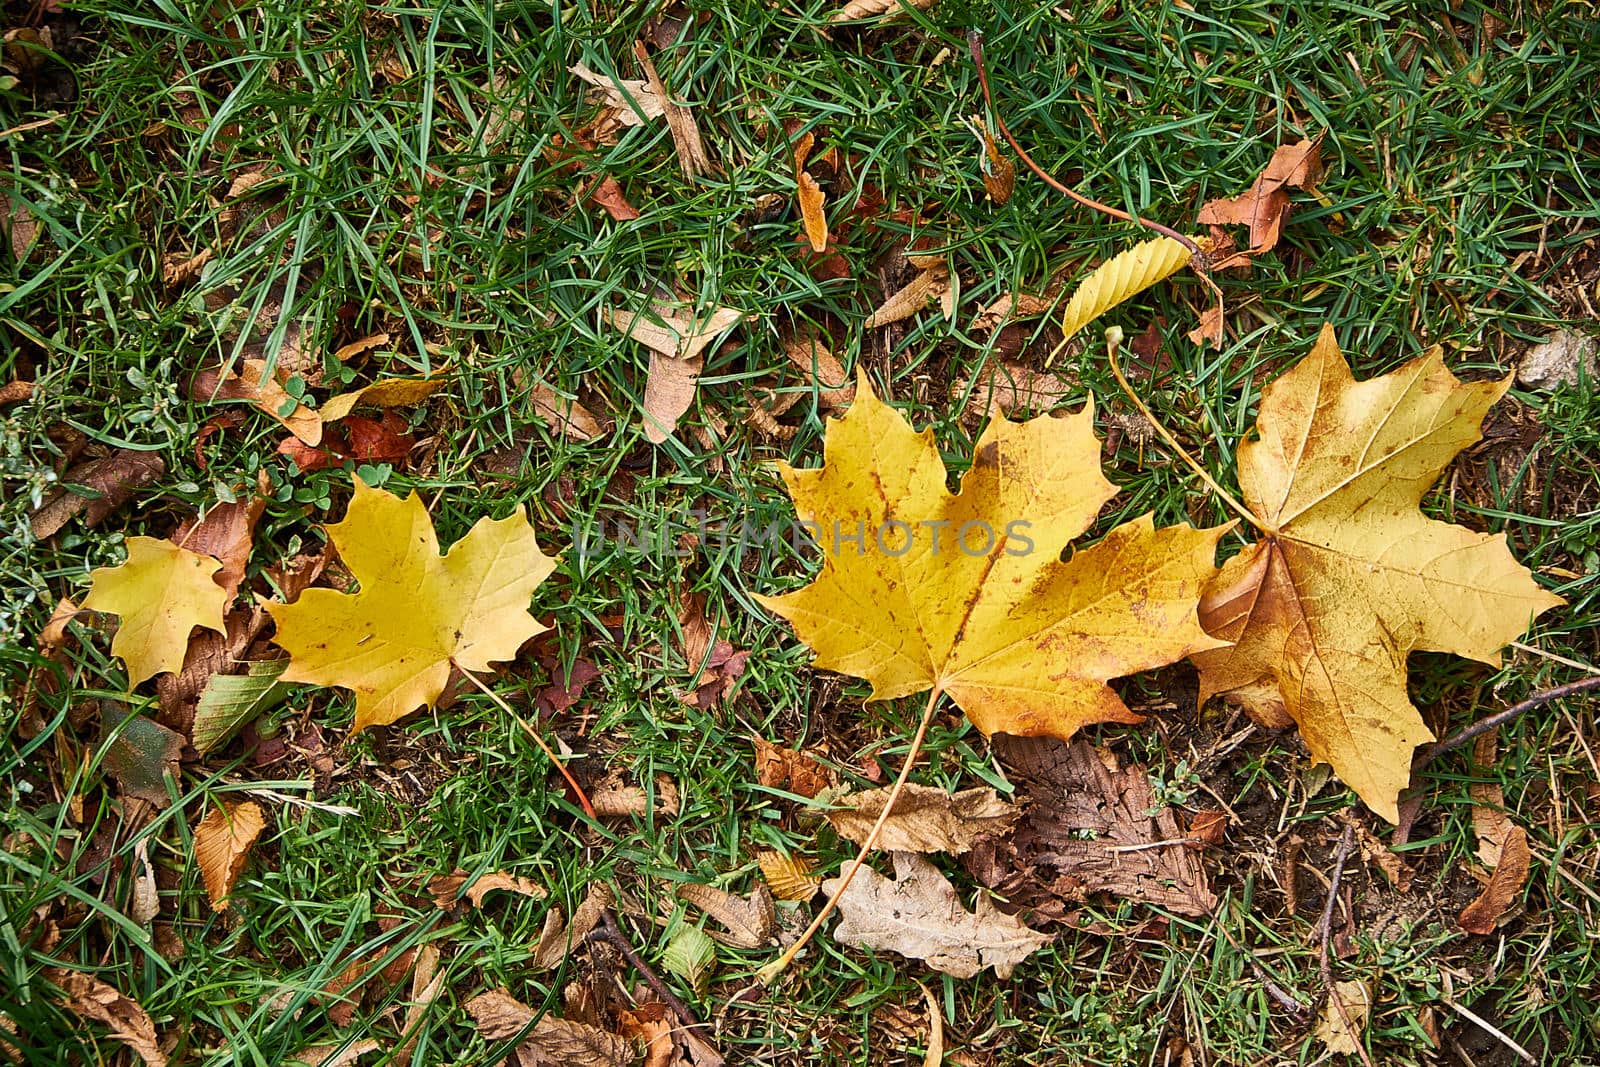 Two dry leaves on the ground in autumn in UK